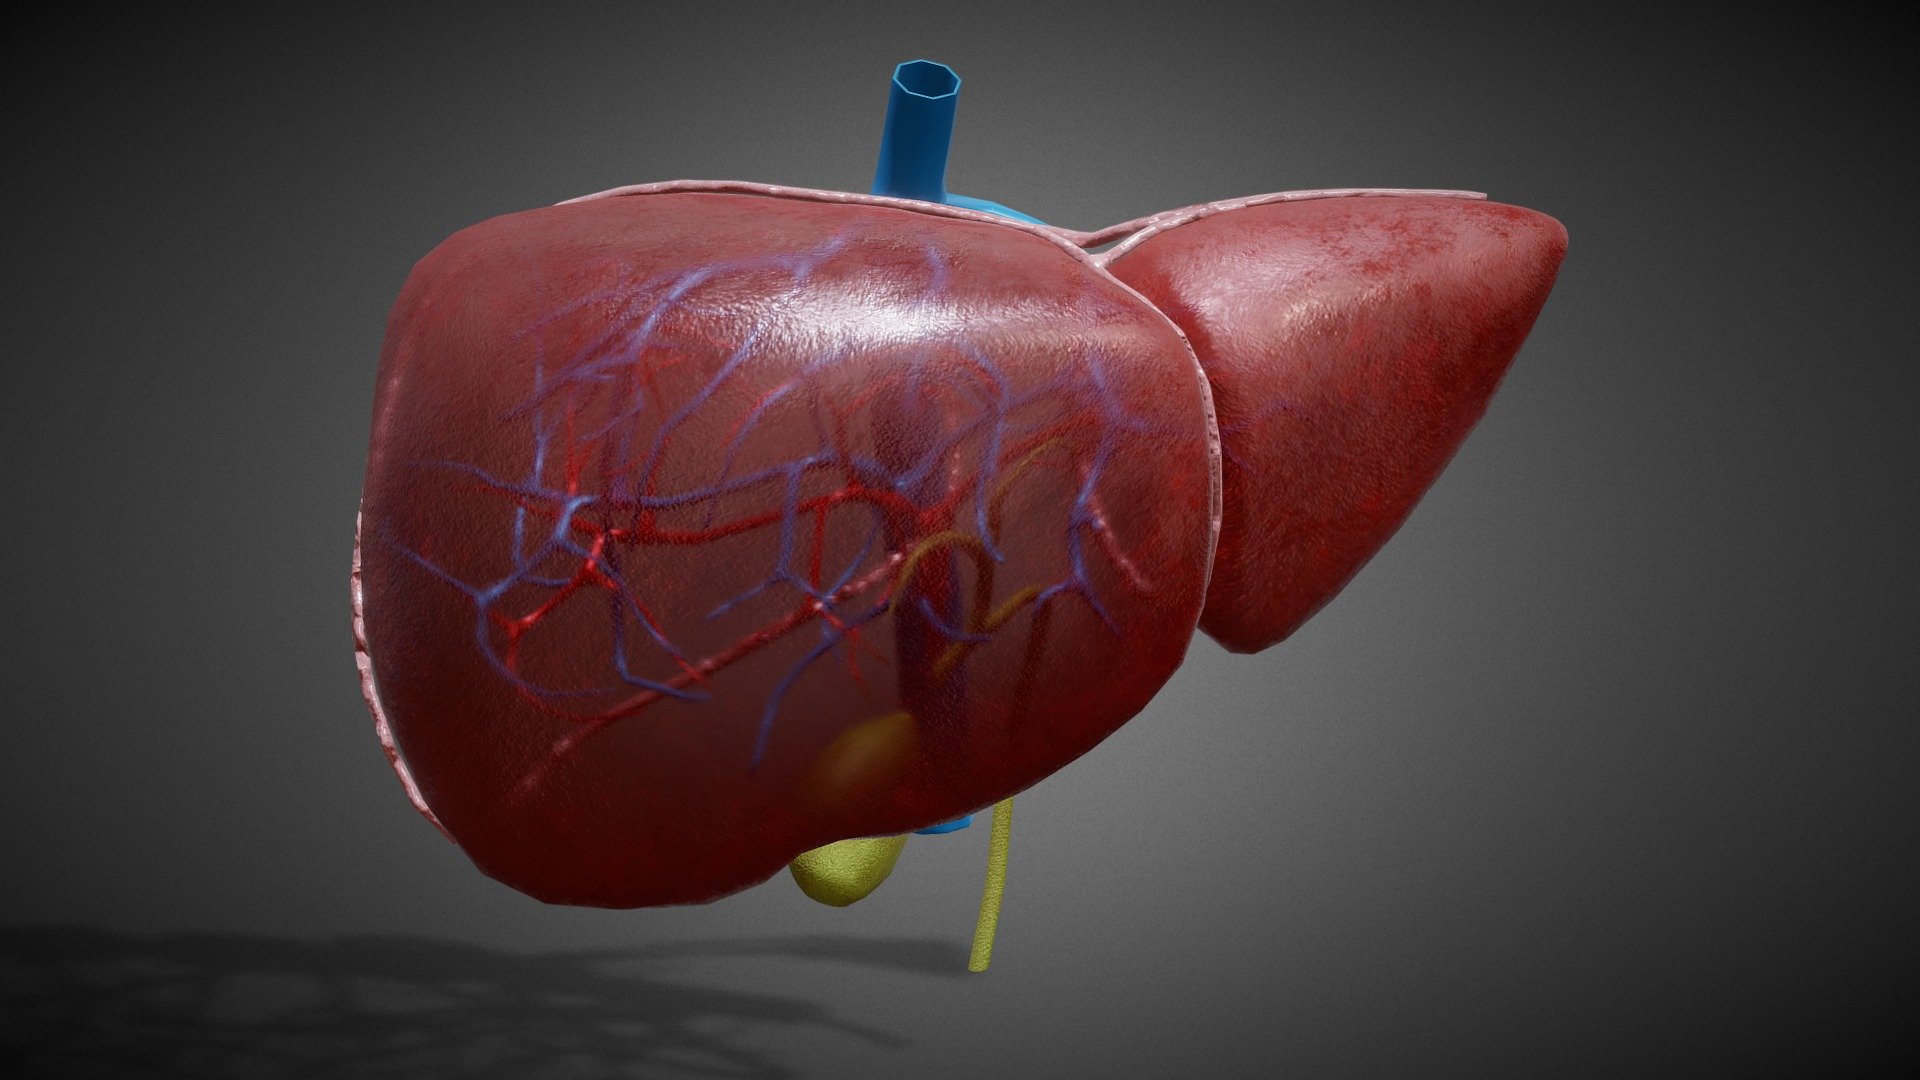 3D Liver Anatomy
Features:




No errors or missing files

High-quality polygonal model

No N-GONS Faces

This model is created in polygon quad &amp; tri with good edge flow, So you can edit and change it according to your requirements

Objects are grouped and named

The scene is well arranged ( layer and group)

Objects, materials, and textures are named

4K Textures



Poly Details:




Units in all formats: centimeters

Polygon: Quad and Tri (Subdivision-ready)

Polys counts: 4271

Vertices counts: 4245



Formats:




3Ds Max 2014 _V-Ray

3Ds Max 2014 _Scanline

Maya 2016_V-Ray

Cinema 4D R20 _Standard

FBX_with Textures

OBJ

PBR TXRs

3Ds



Textures:





Diffuse-Base-Normal-Specular-Reflection-Metallic-AO-Glossines-Roughness-Refraction-Opacity




Liver_mtl  (9.PNG Files) _4096x4096 (4K Textures)



U can find this model for sale on Turbosquid by searching for “3d 1821345”( that’s the closest I can get to giving a link without breaking sketchfab’s ToS) - 3D Human Liver Anatomy - Buy Royalty Free 3D model by 3D4SCI 3d model